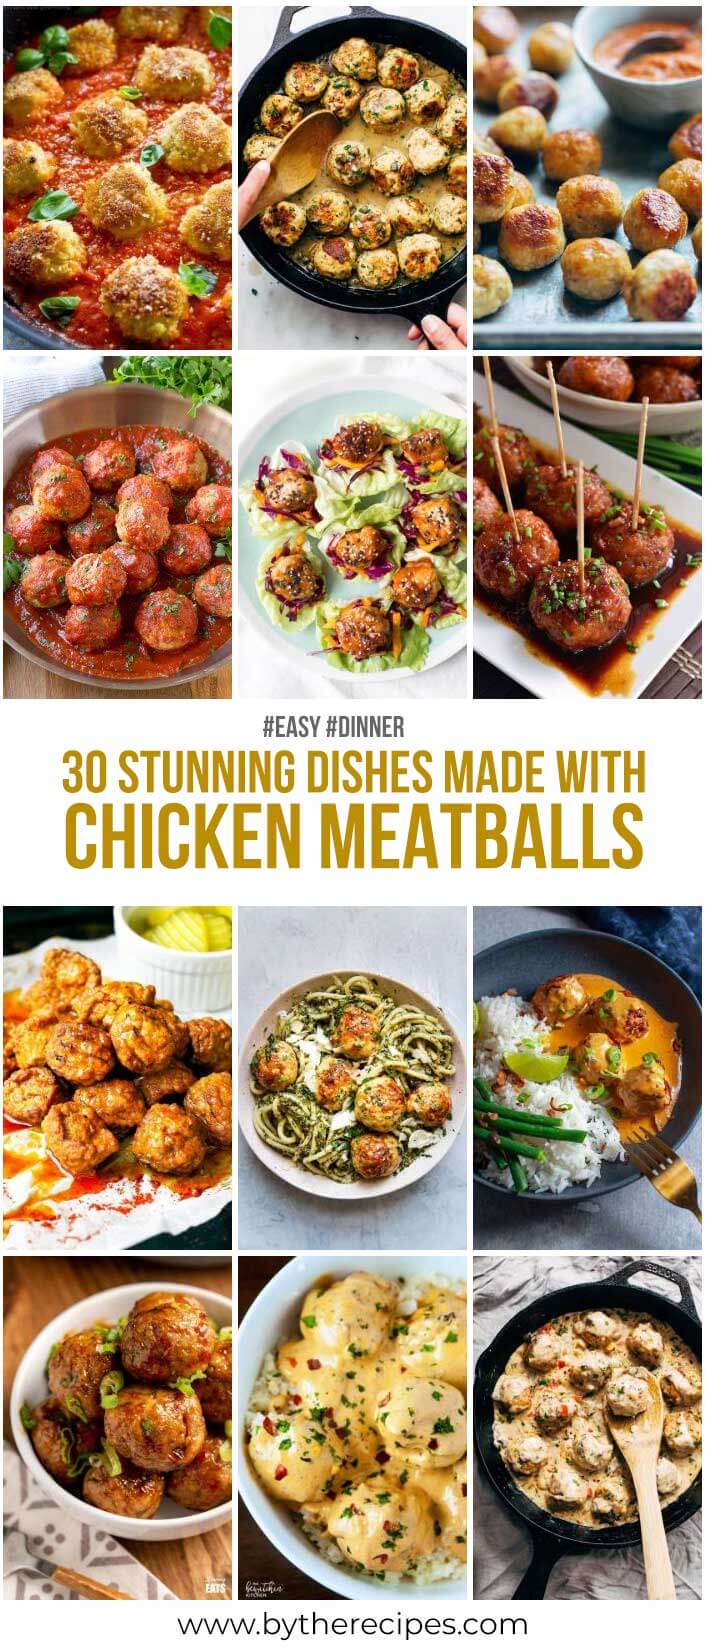 30 Stunning Dishes Made with Chicken Meatballs